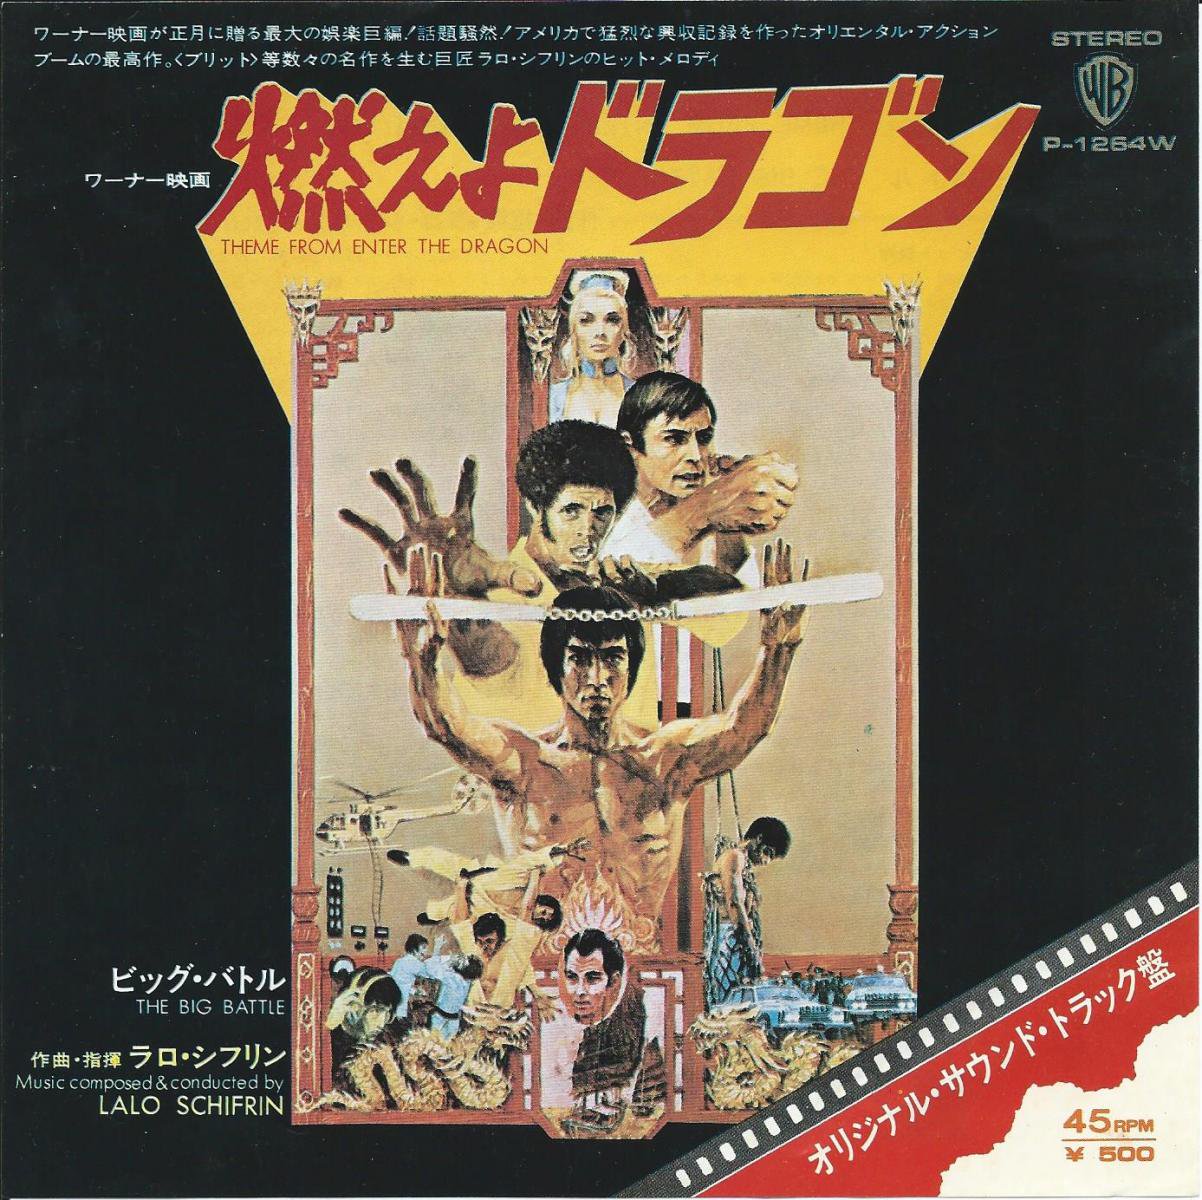 O.S.T. (LALO SCHIFRIN ラロ・シフリン) / THEME FROM ENTER THE DRAGON 燃えよドラゴン (7